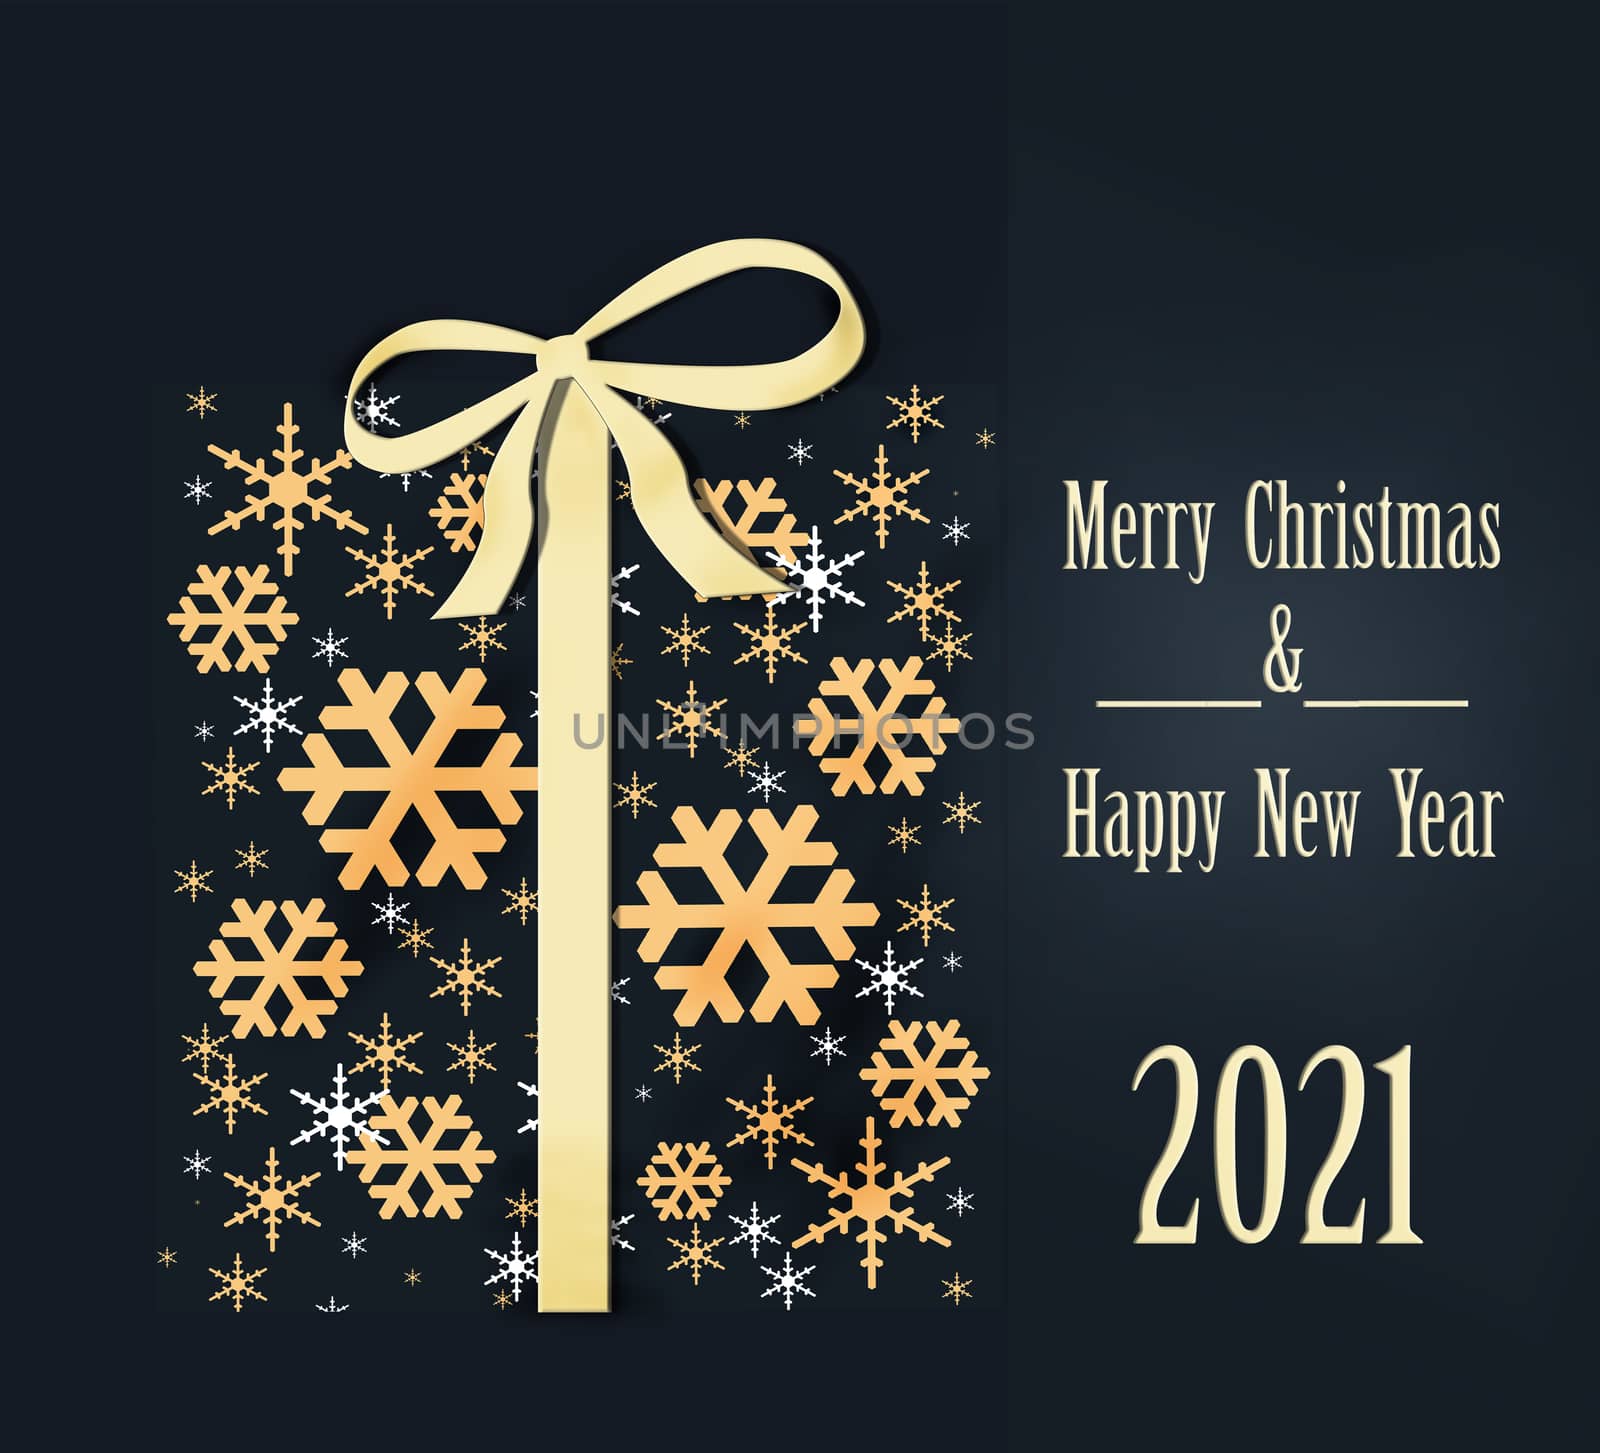 Luxury Christmas greeting card concept with gold words Merry Christmas and 2021 Happy New Year. Abstract wrapped gift box with golden snowflakes on dark background. Illustration